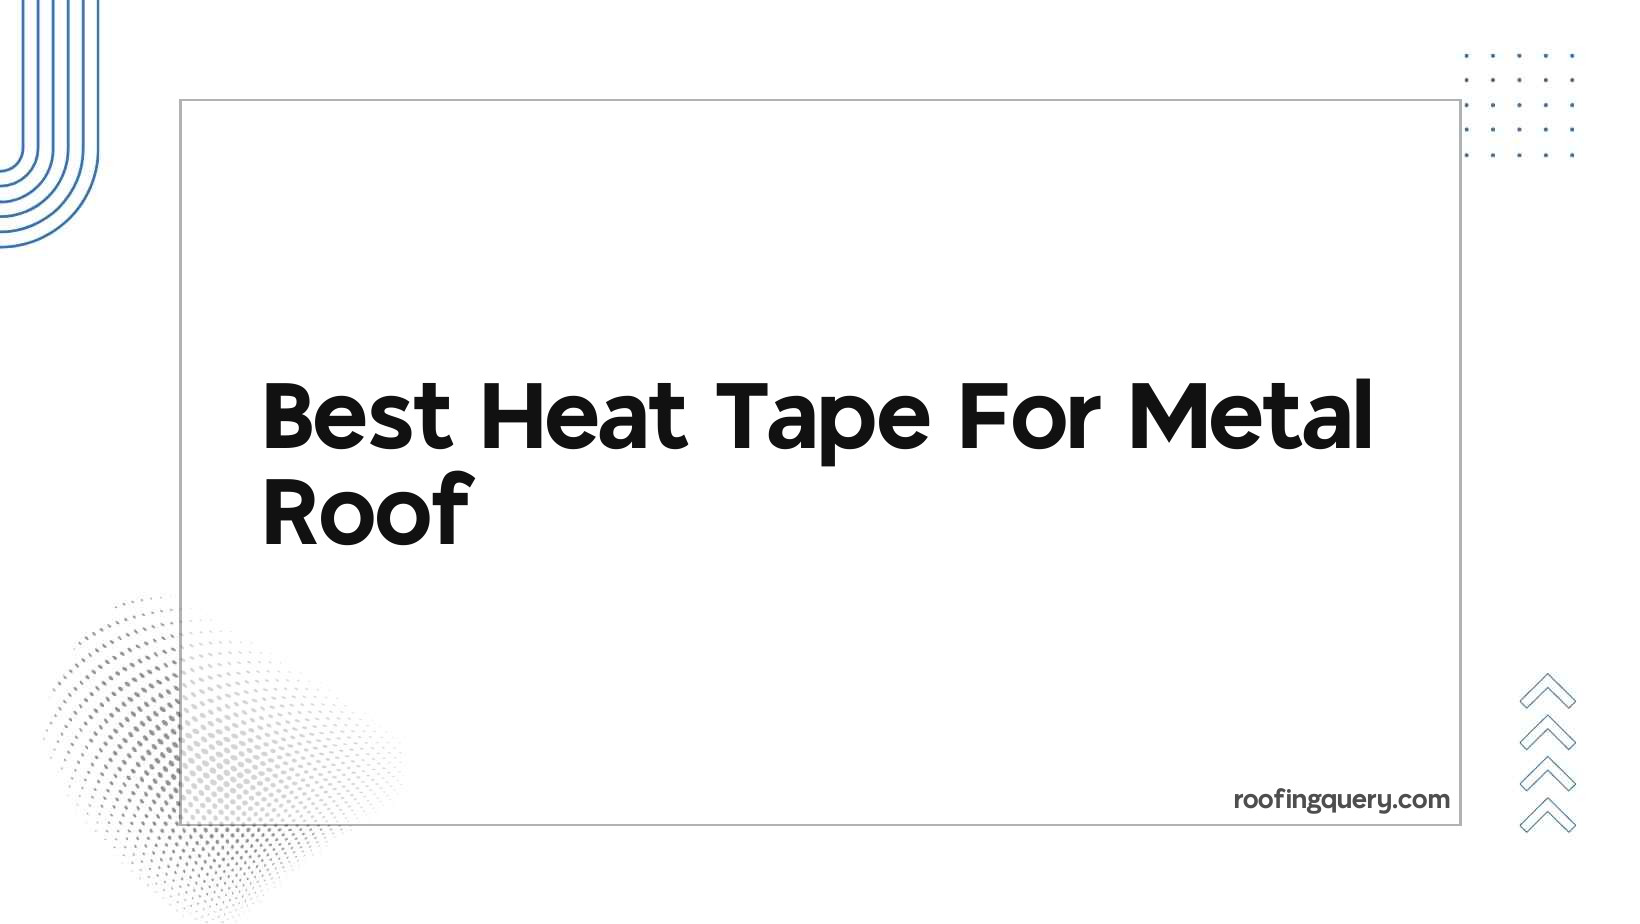 Best Heat Tape For Metal Roof